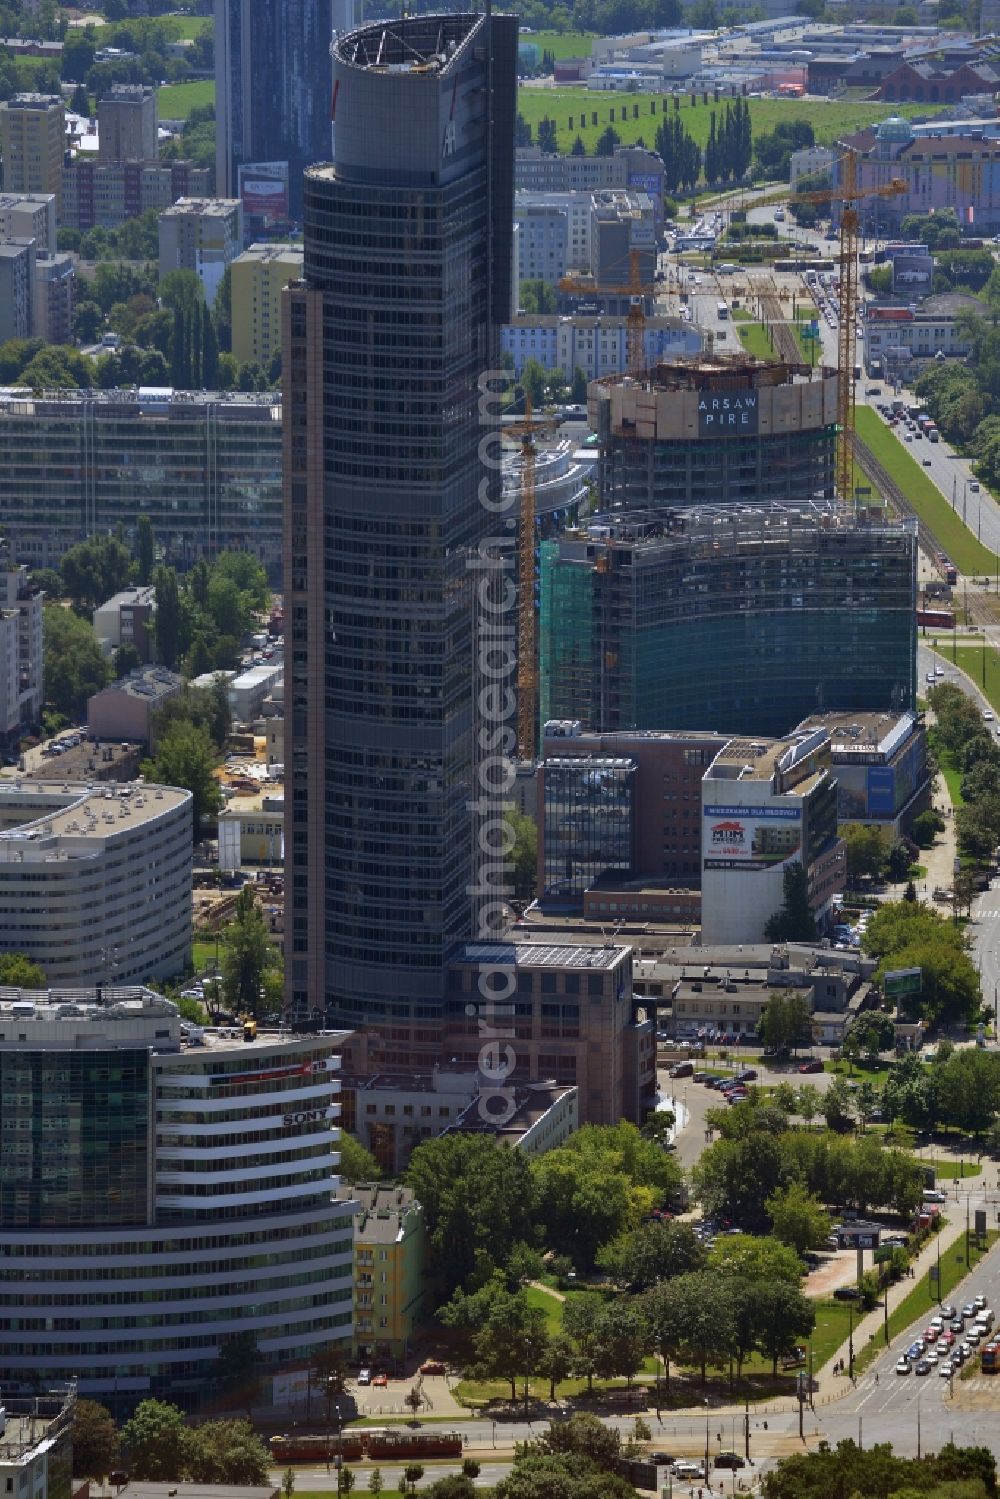 Aerial image Warschau - Warsaw Trade Tower in the Wola district of Warsaw in Poland. The skyscraper is an office building whose primary tenant is the insurance company AXA. Its logo is very well visible on the upper floors. The tower is over 200m high and has Europe's fastest elevator. It was completed in 1999 after two years of construction and is the second tallest building in Warsaw